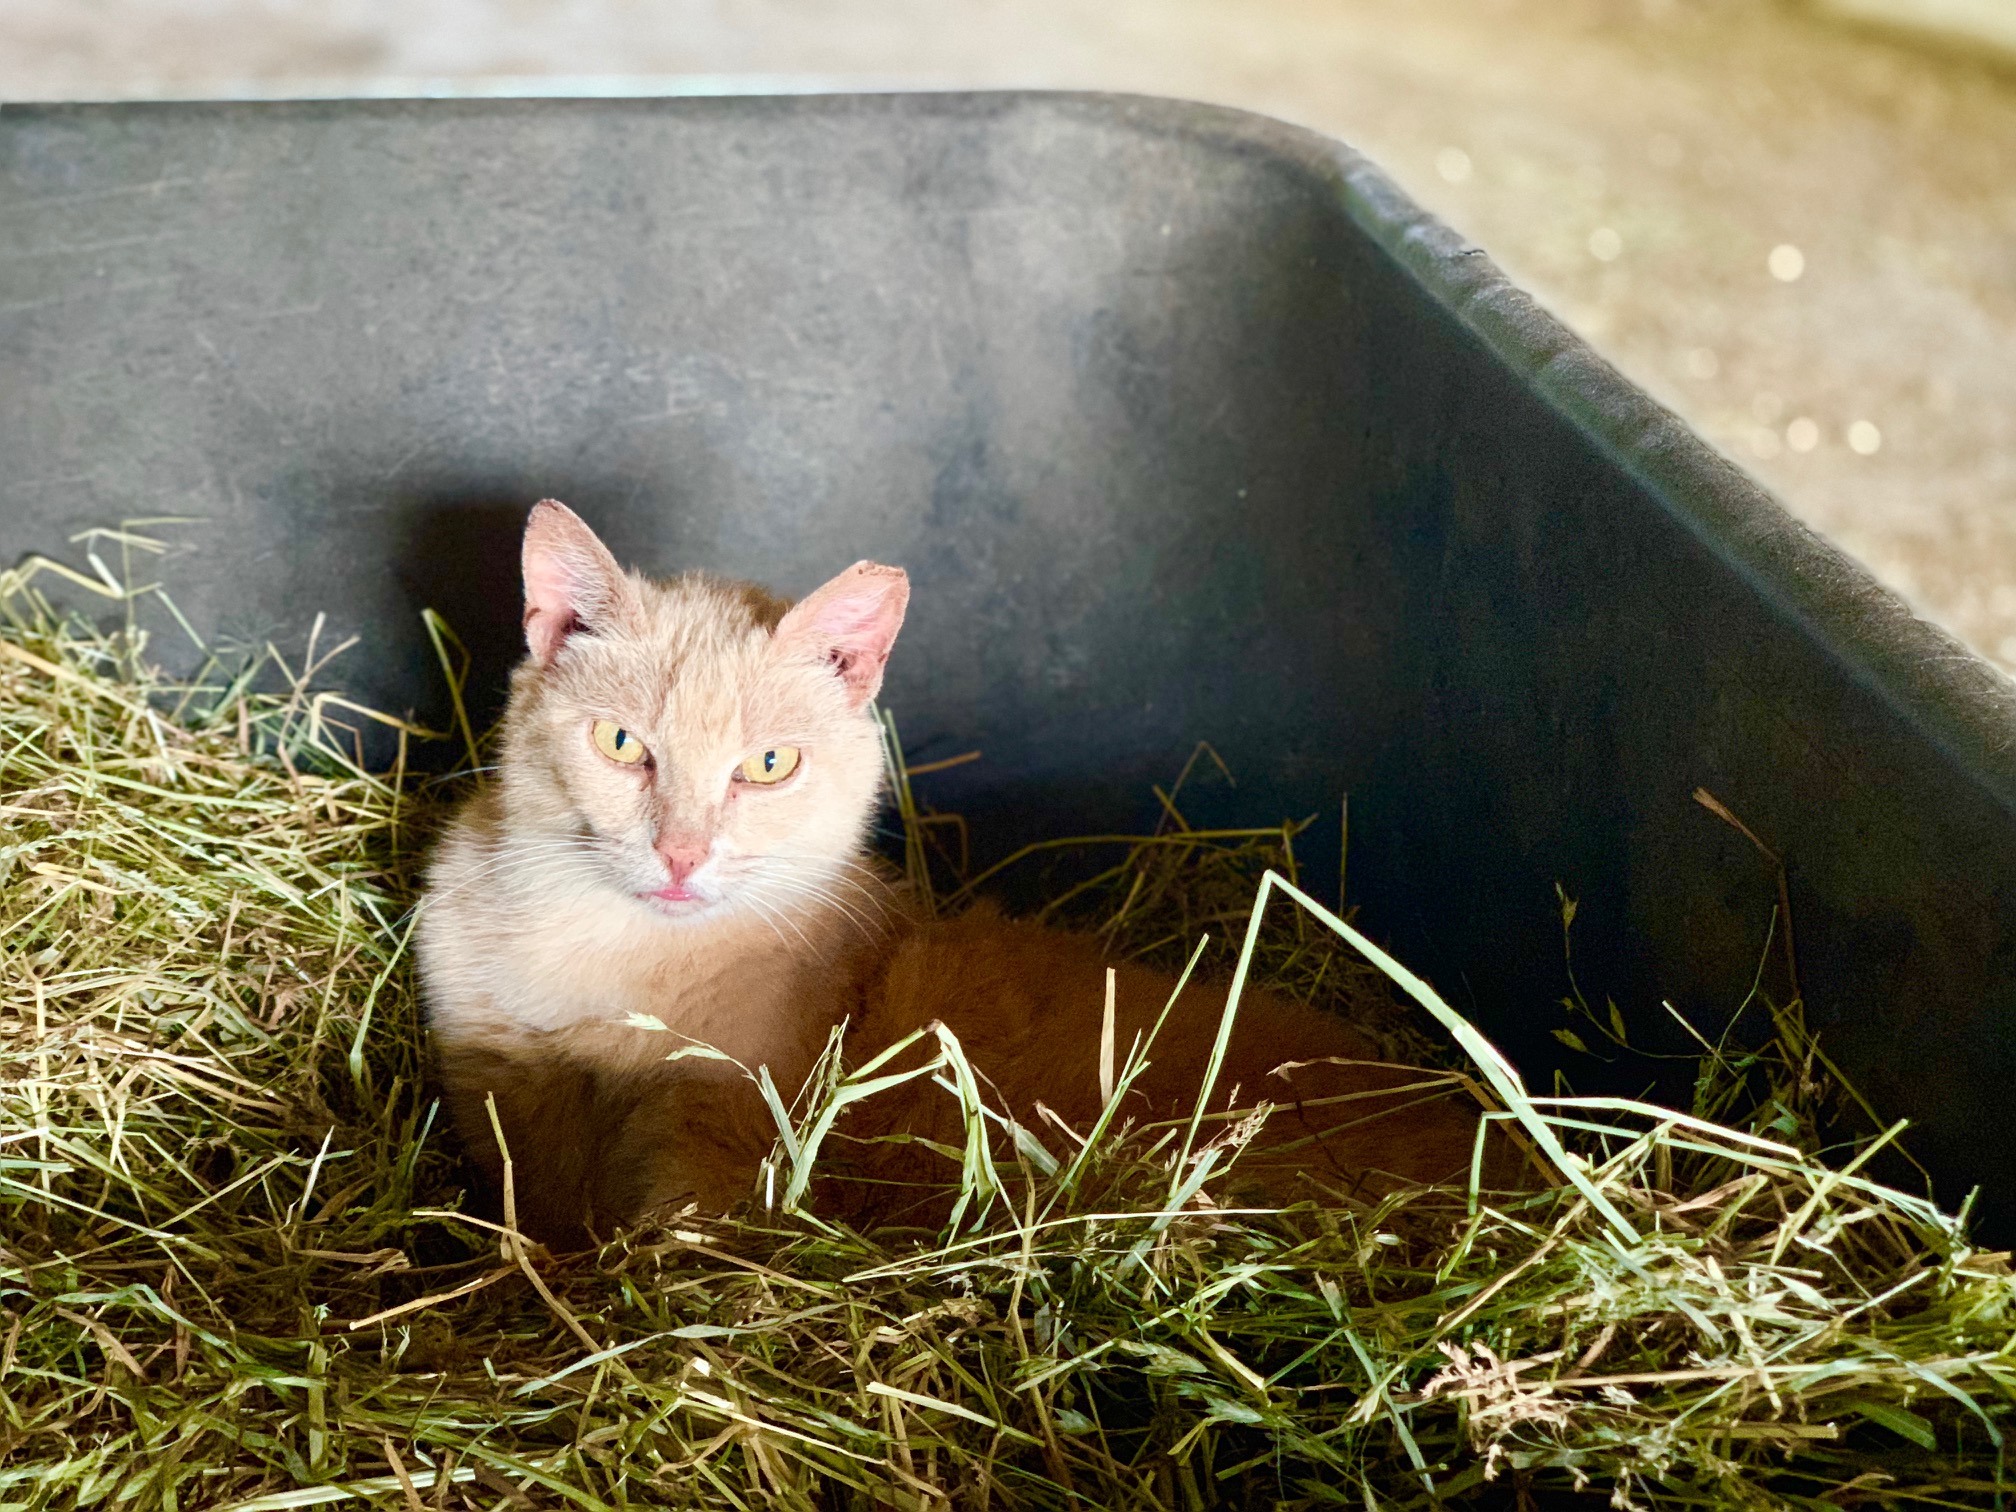 McLaren, one of our sanctuary cats, finds a comfy spot in a pile of hay.